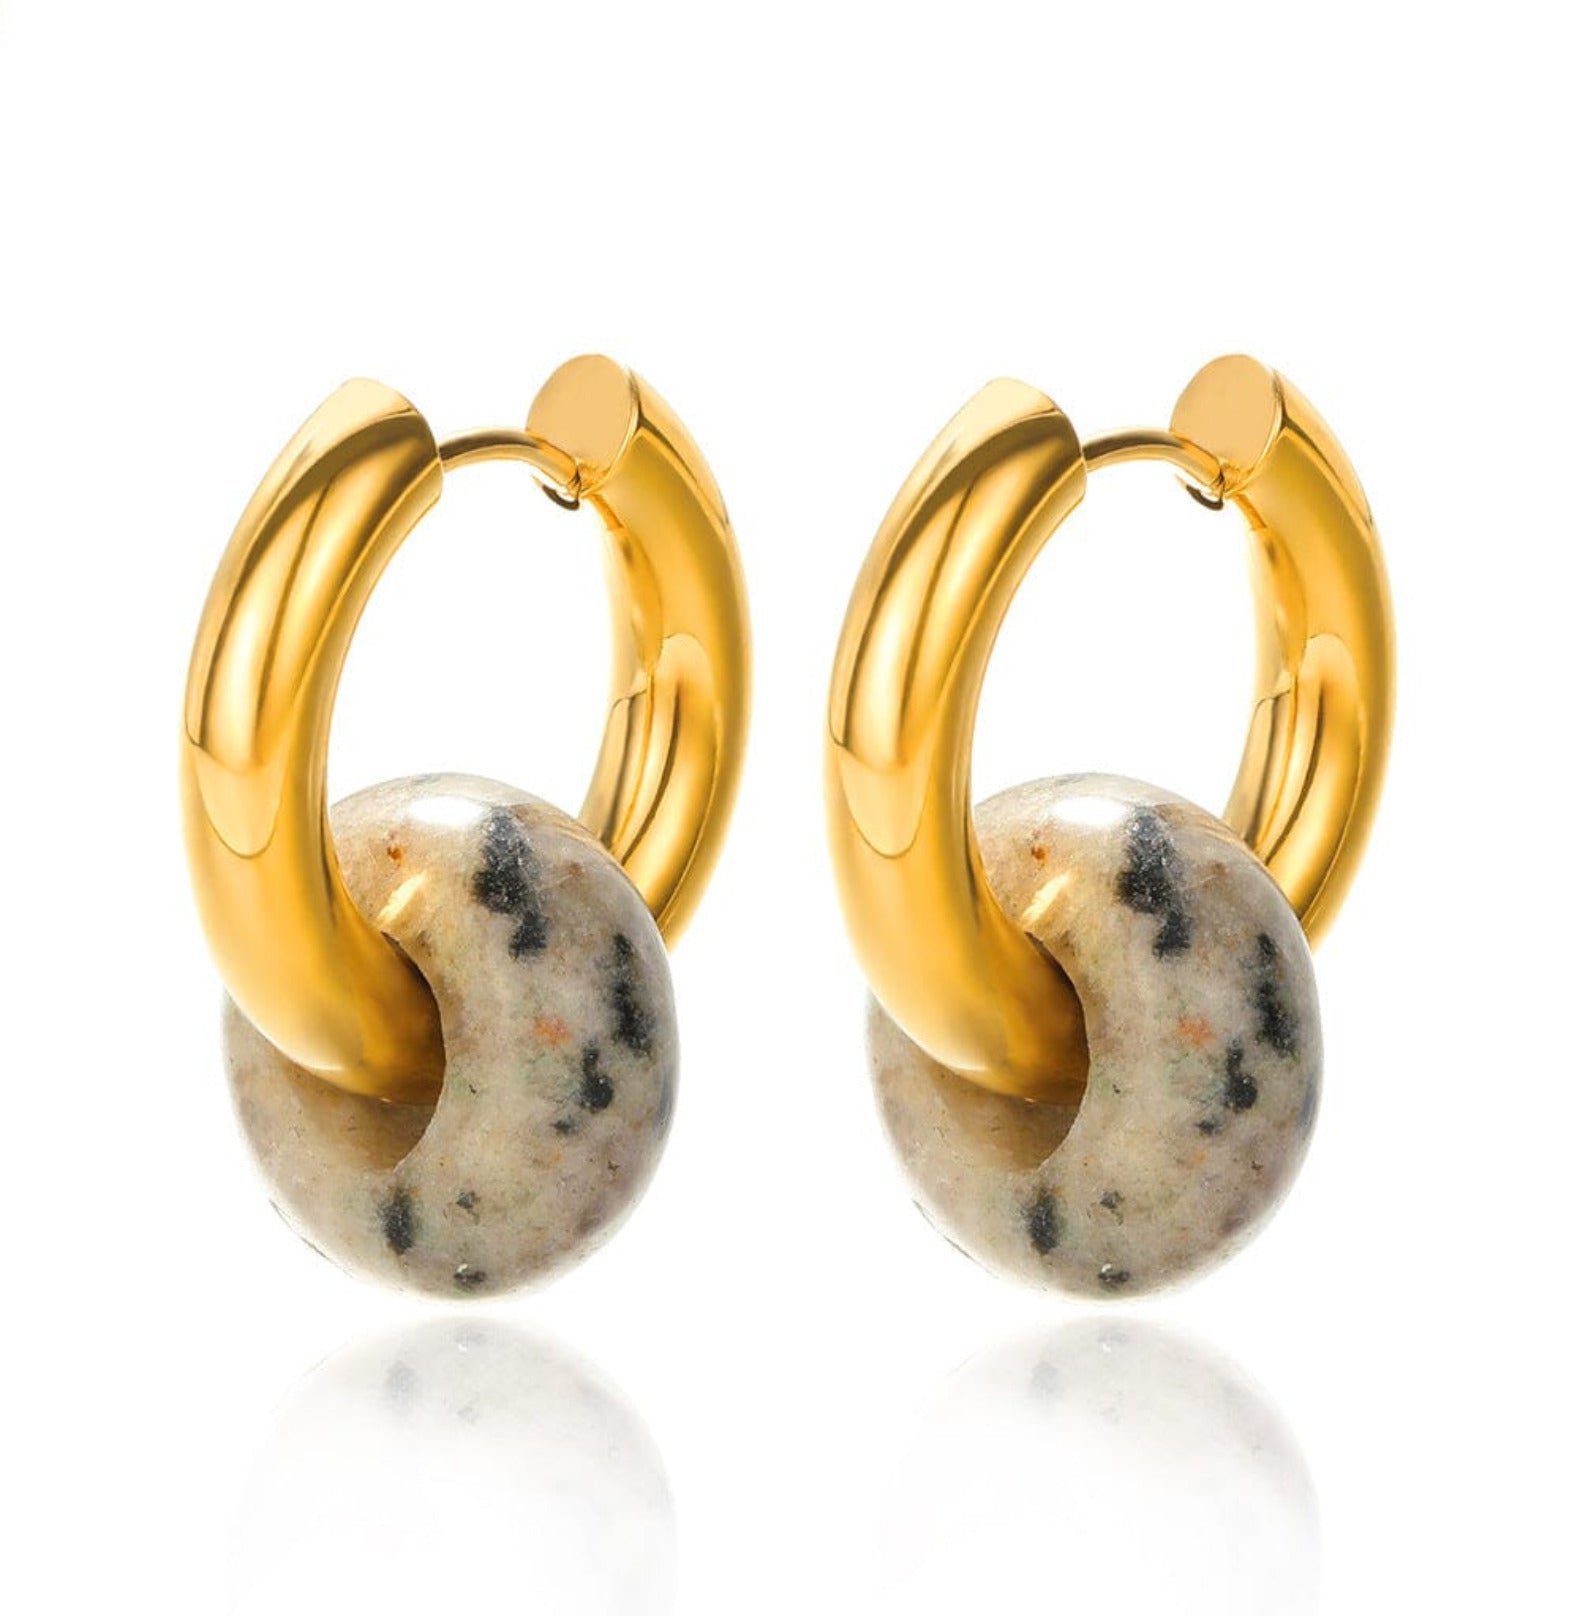 Women's Fashionable Natural Stone Simple Earrings earing Yubama Jewelry Online Store - The Elegant Designs of Gold and Silver ! 2 Style 